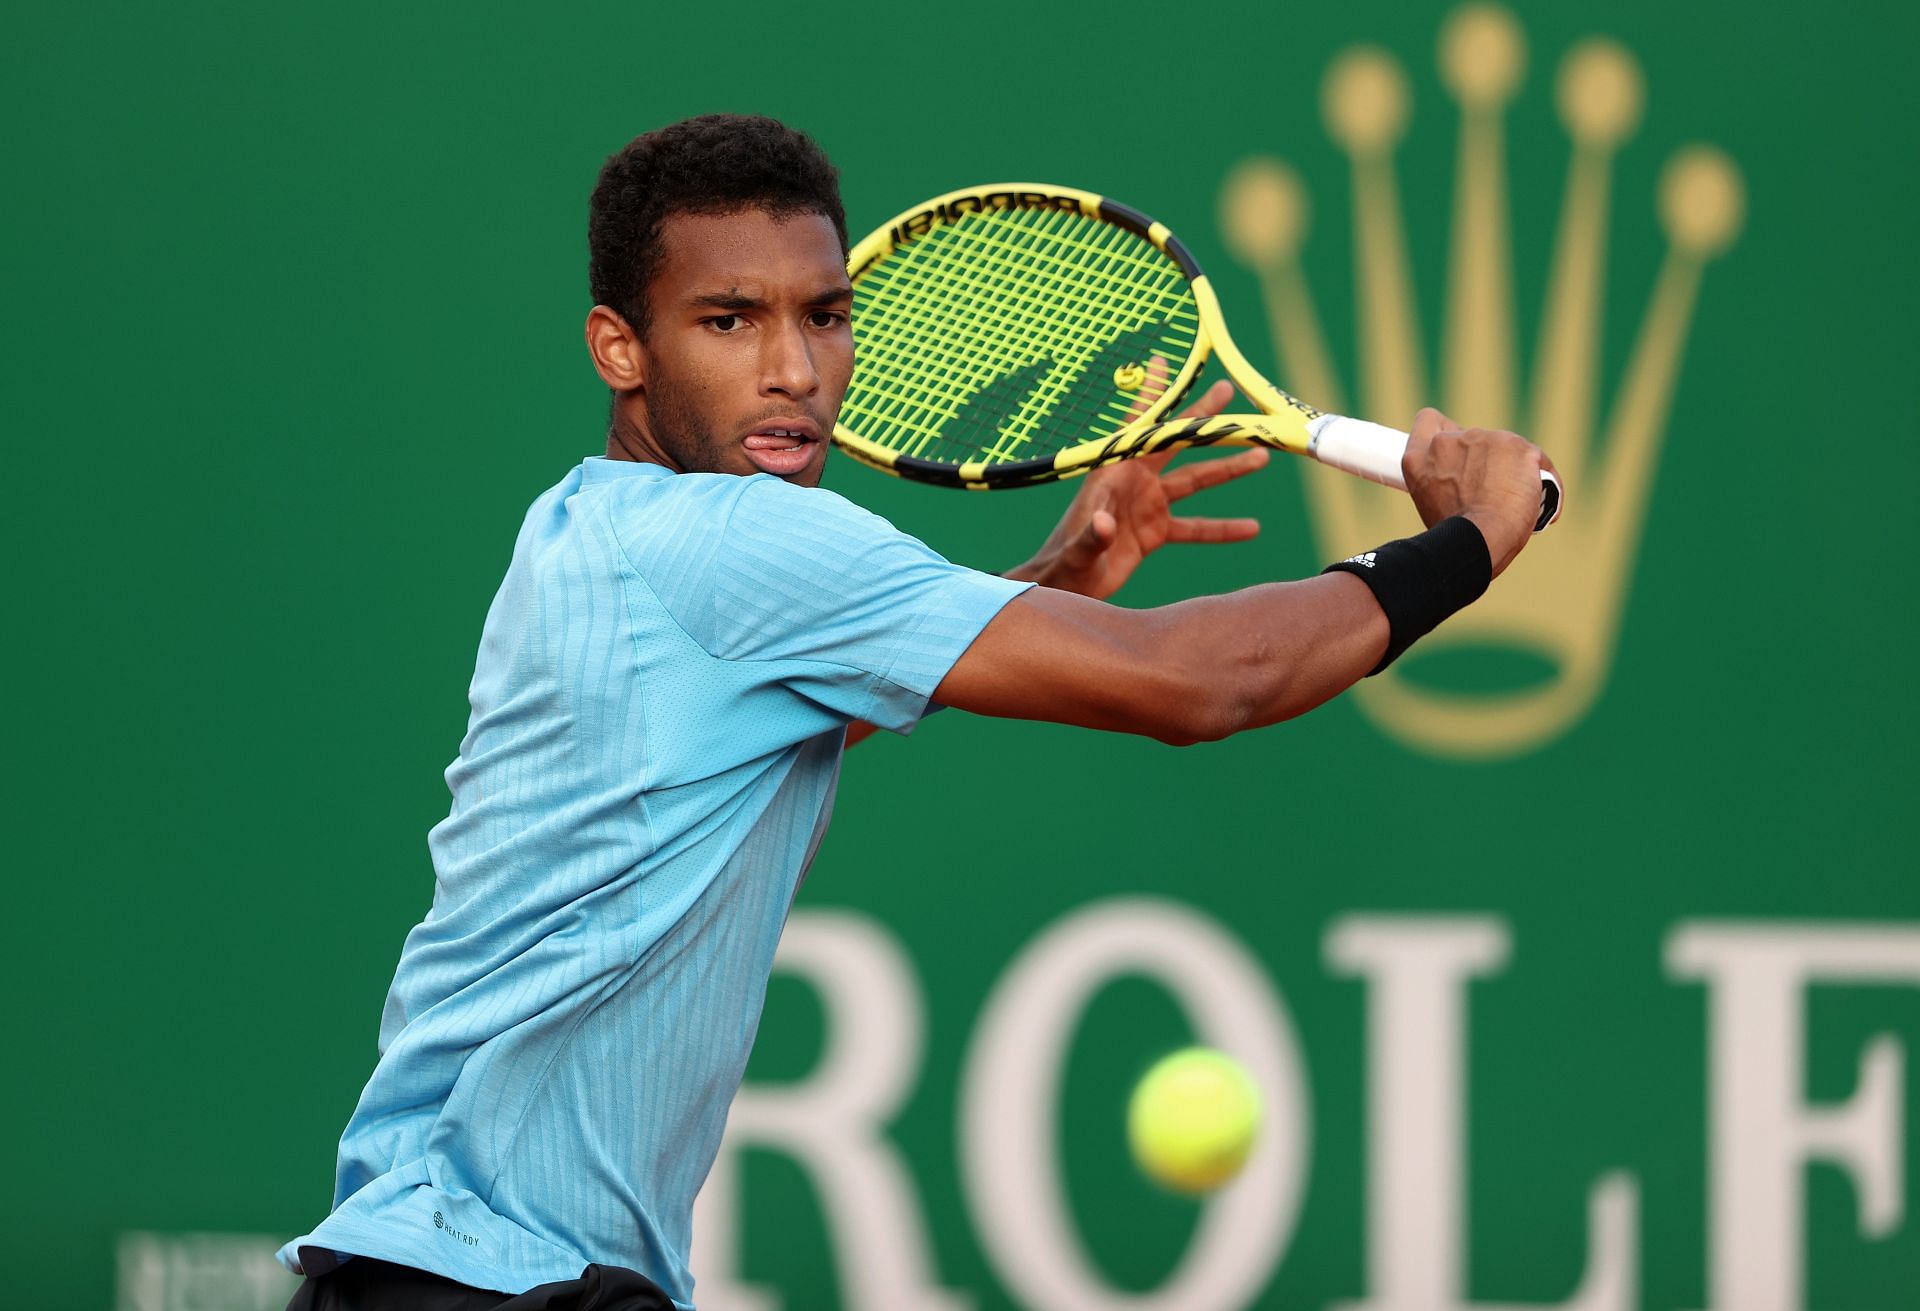 Felix Auger-Aliassime expects a group of 8-10 players to dominate the tour in the coming years